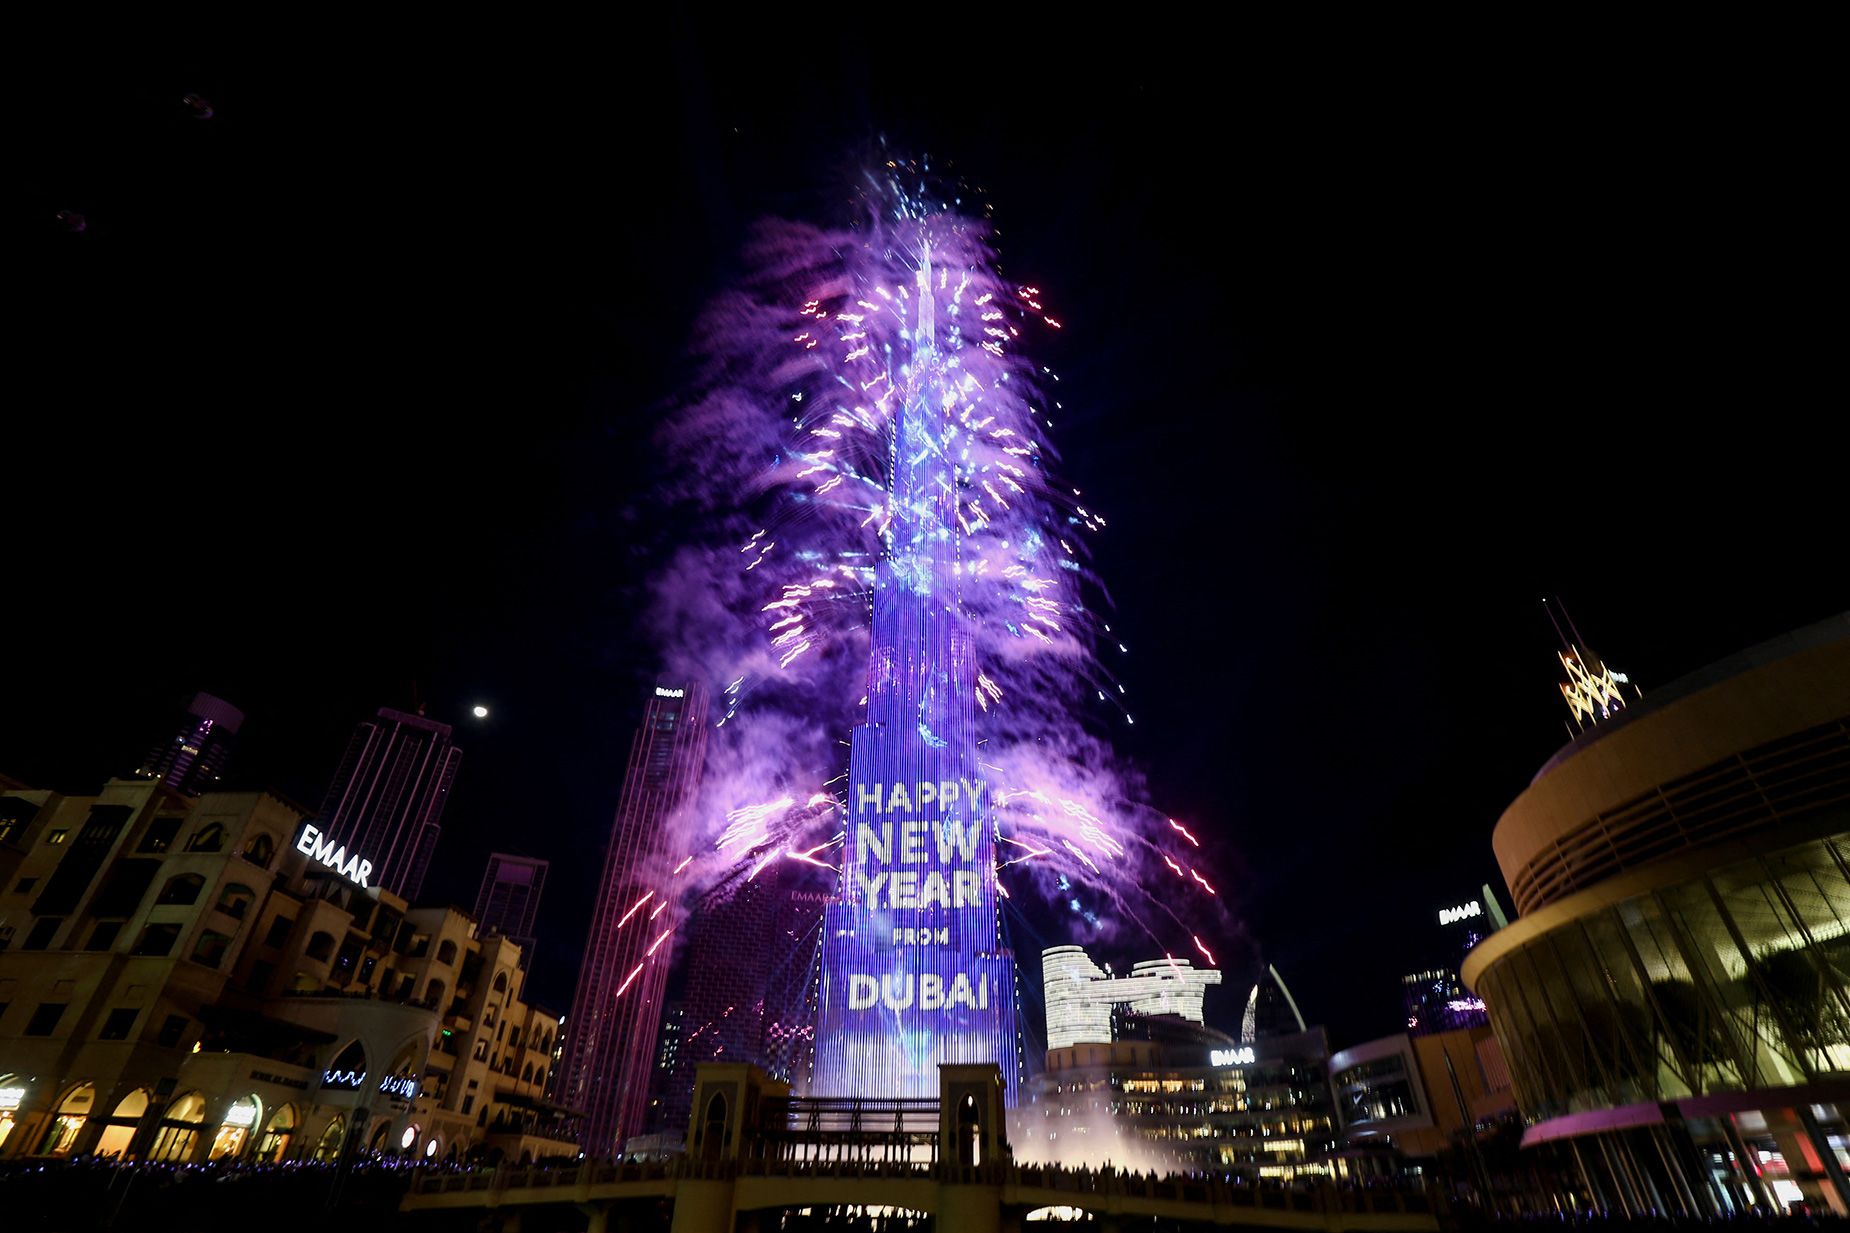 10 great places for New Year’s Eve fireworks and more CNN